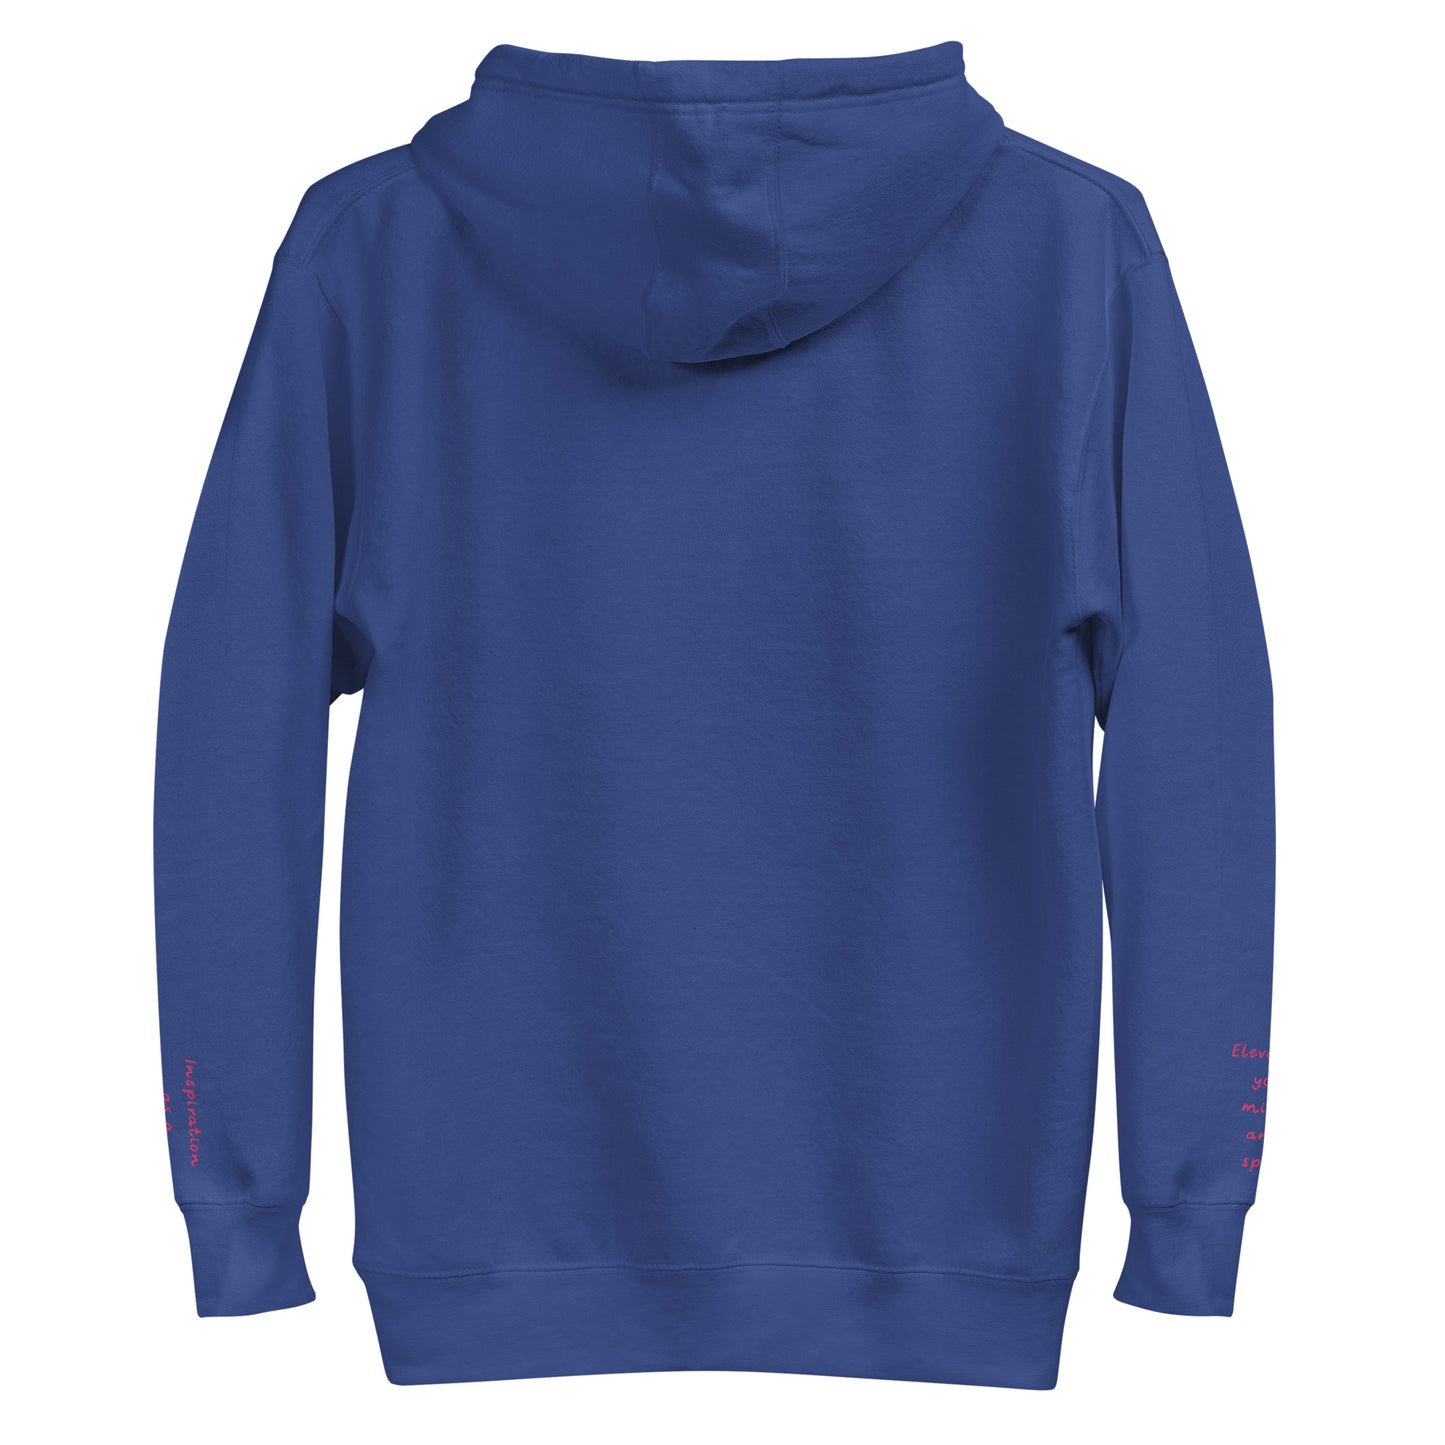 VZI Exaltia Hoodie - Inspiration as driving force writing on left hand